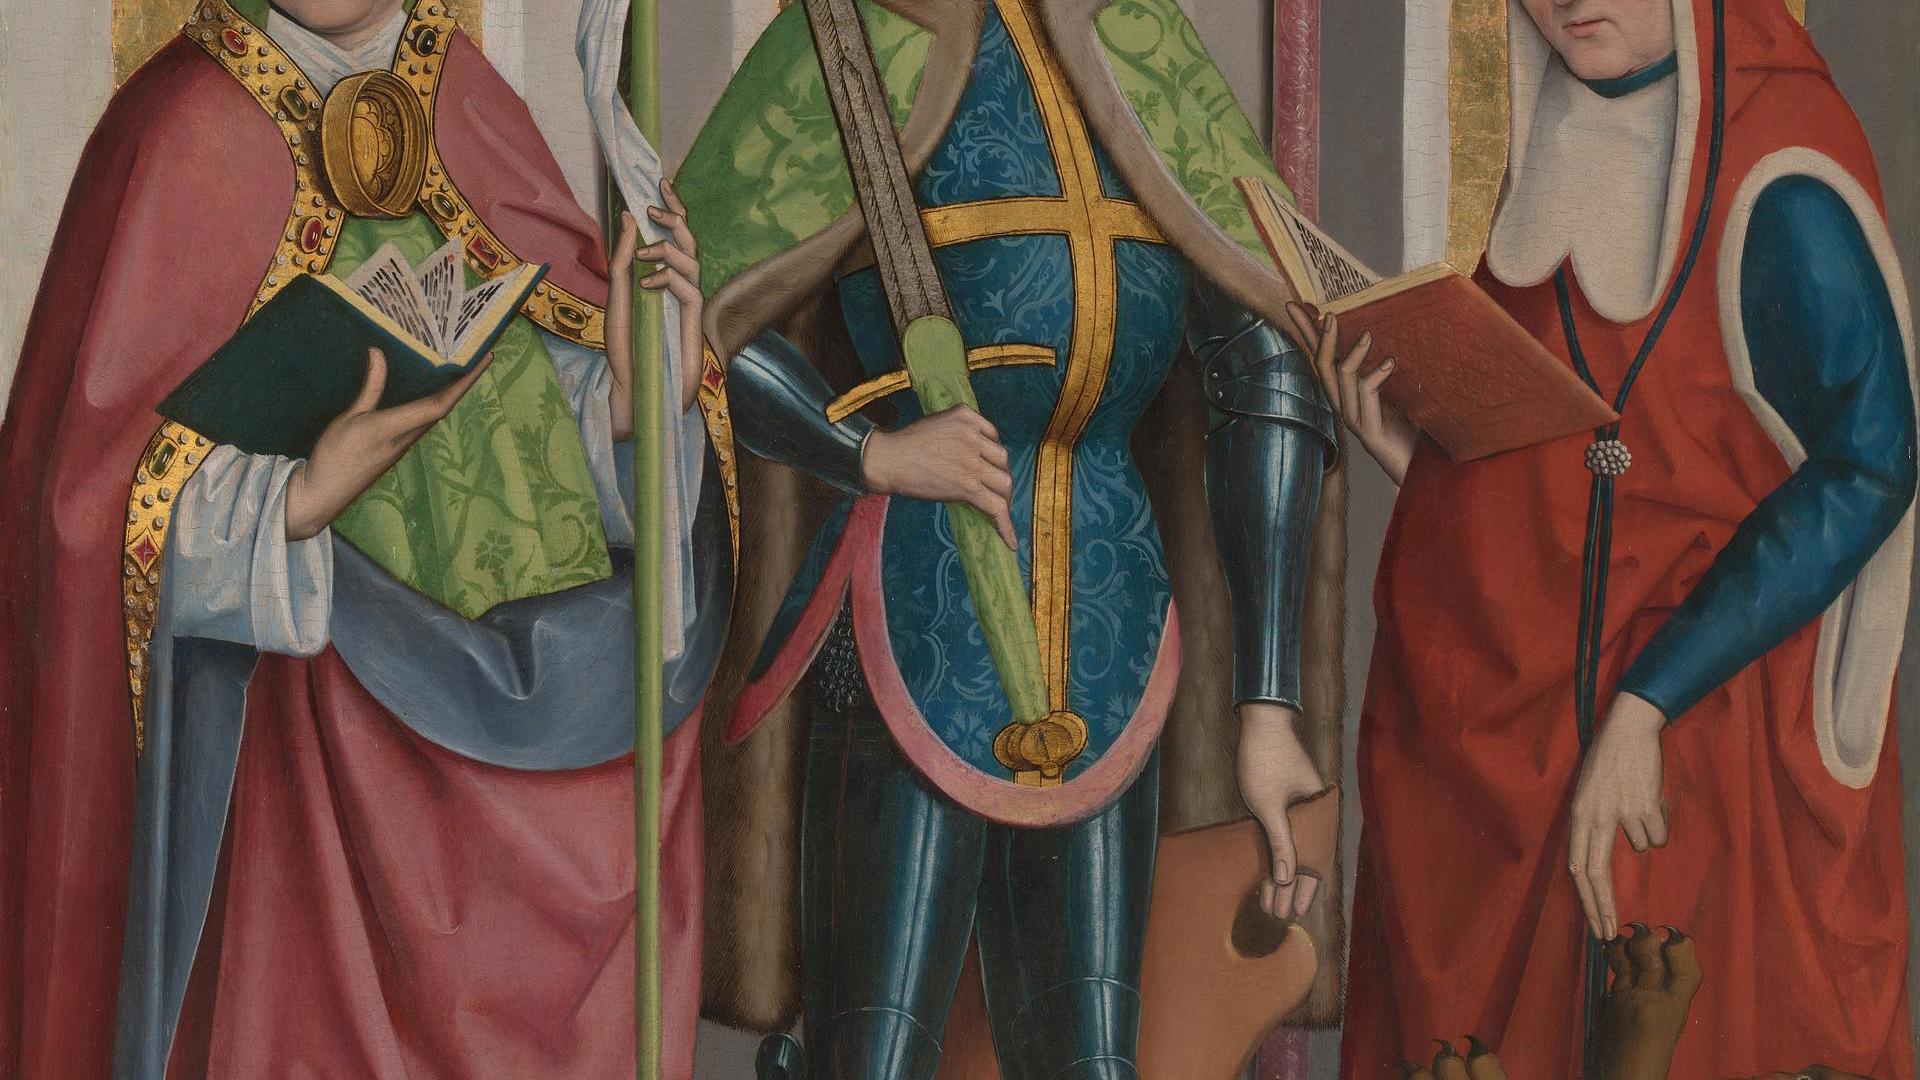 Saints Ambrose, Exuperius and Jerome by Circle of the Master of Liesborn